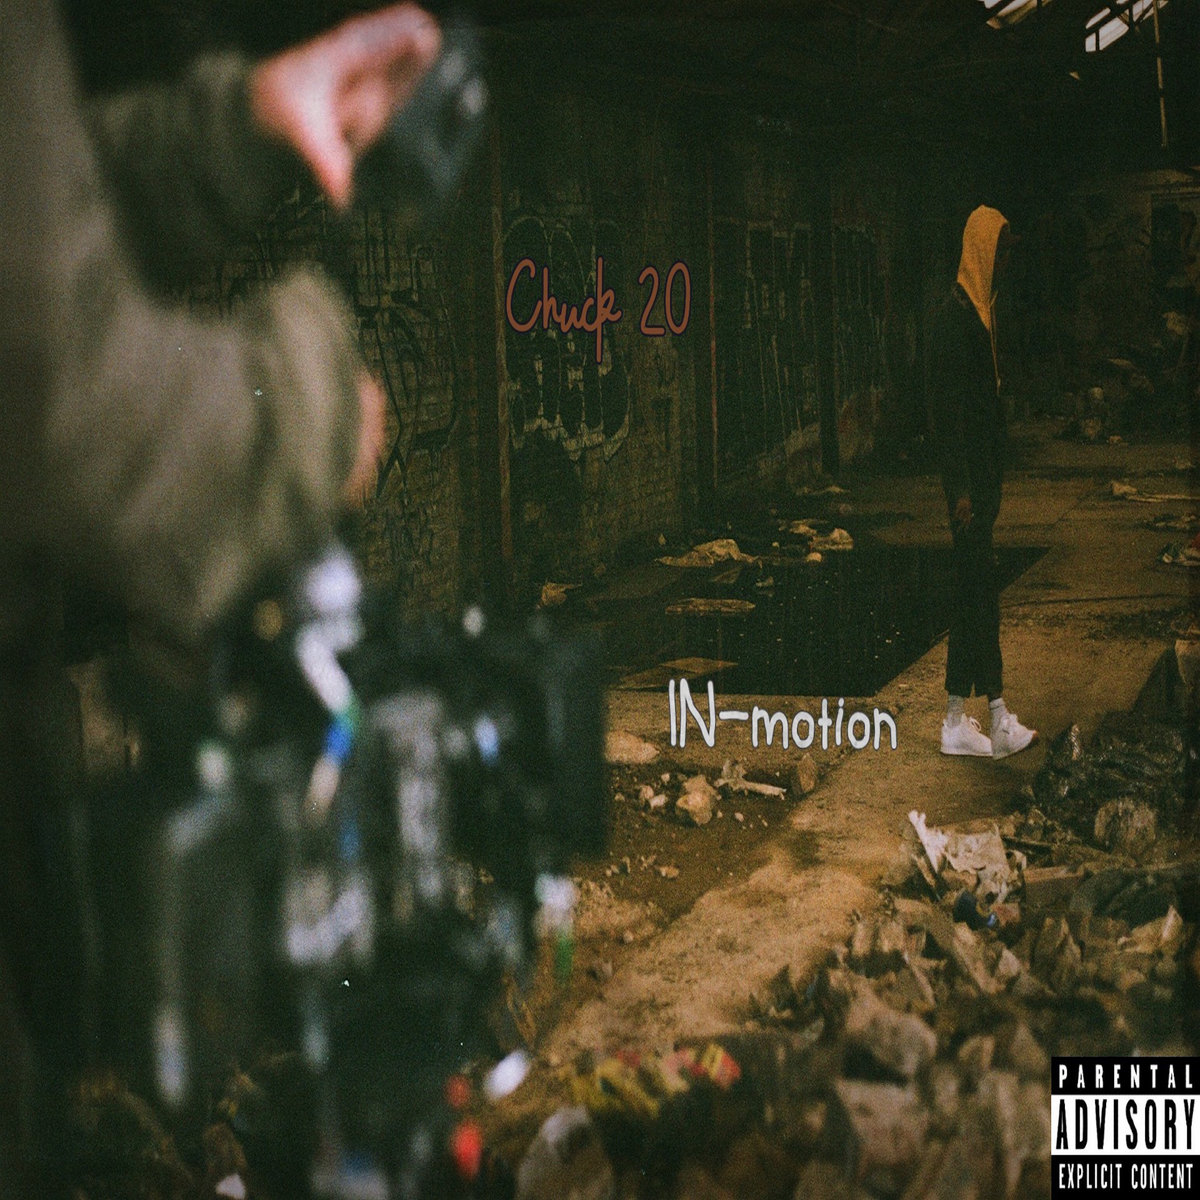 London artist Chuck 20 shares new tape "IN​-​motion"